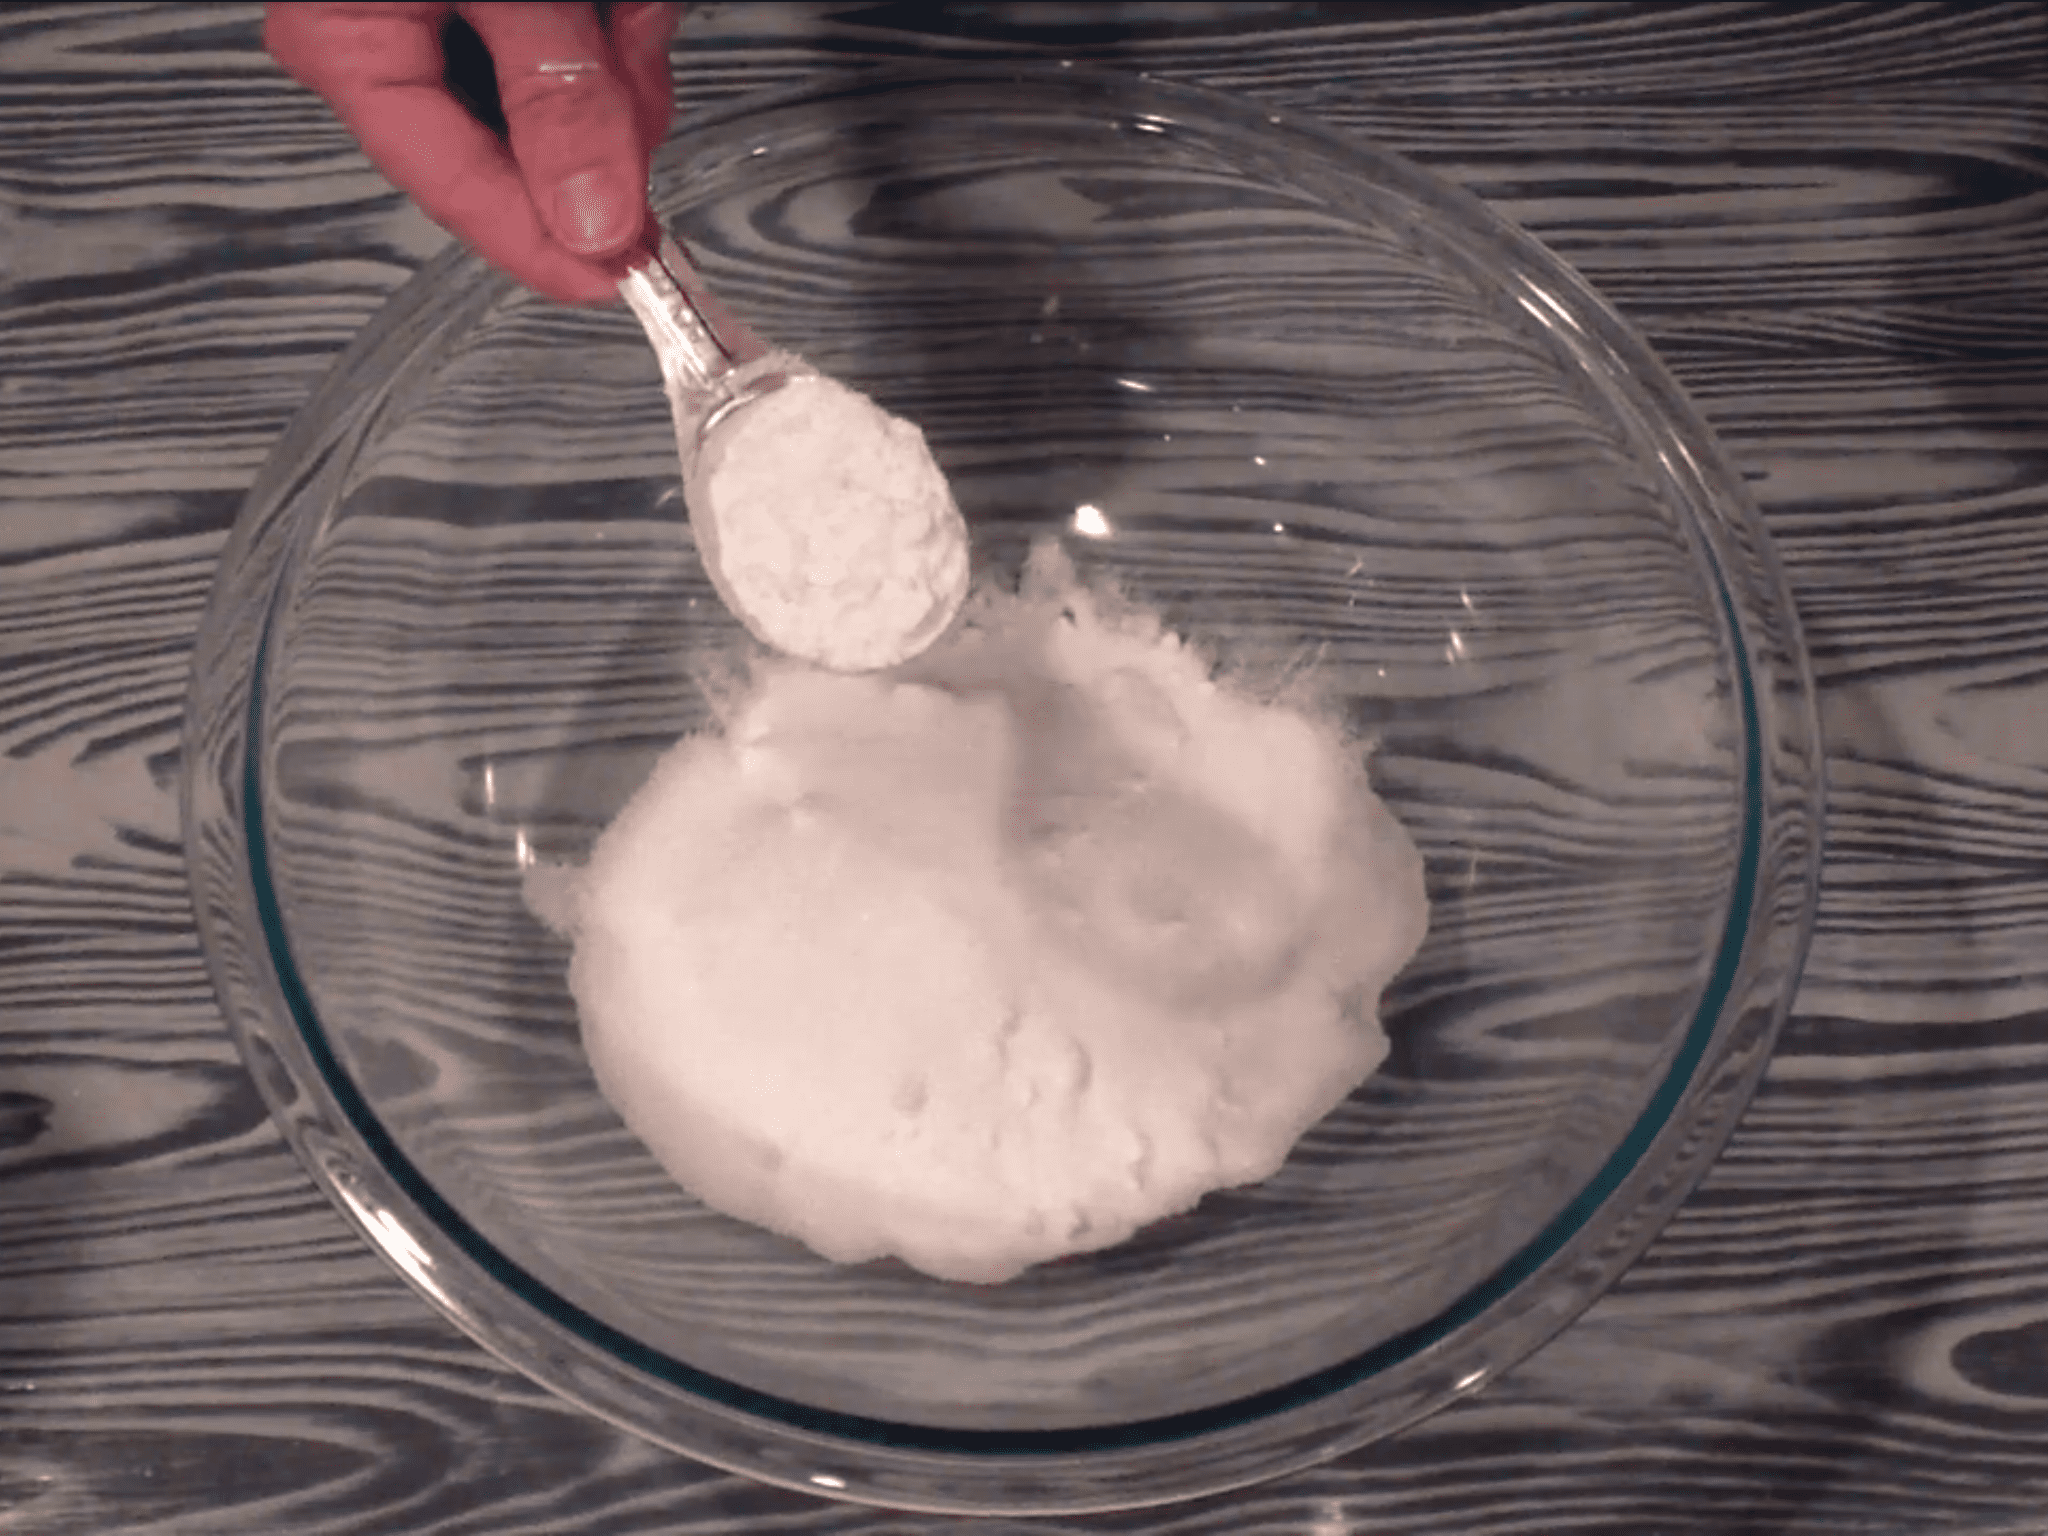 Adding 3 Tablespoons cornstarch to mixing bowl